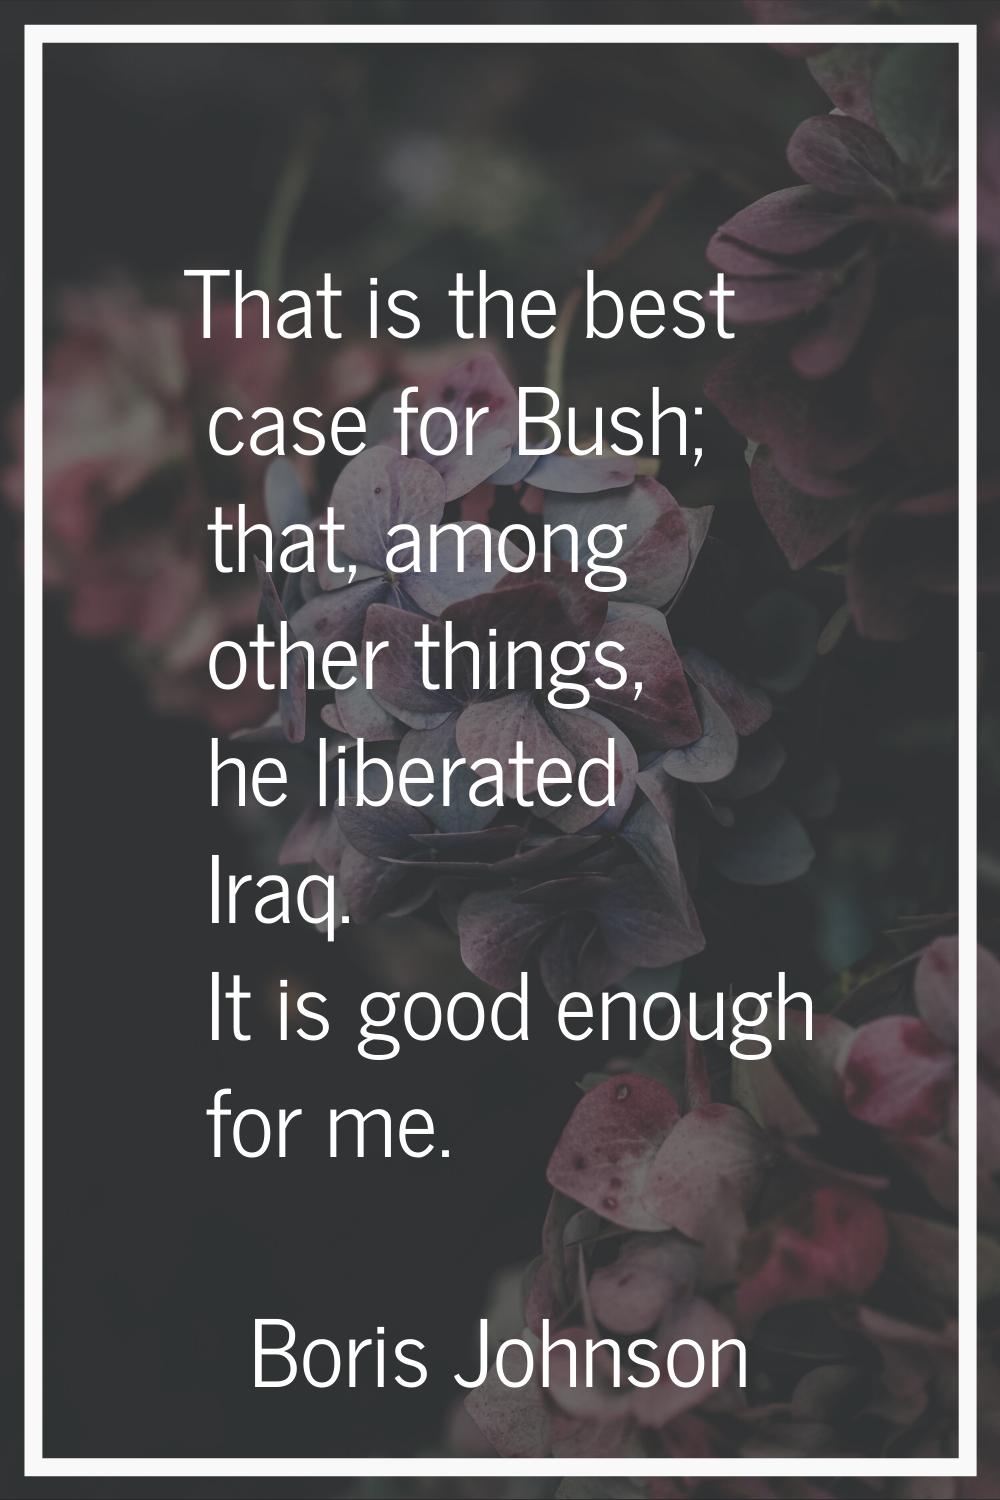 That is the best case for Bush; that, among other things, he liberated Iraq. It is good enough for 